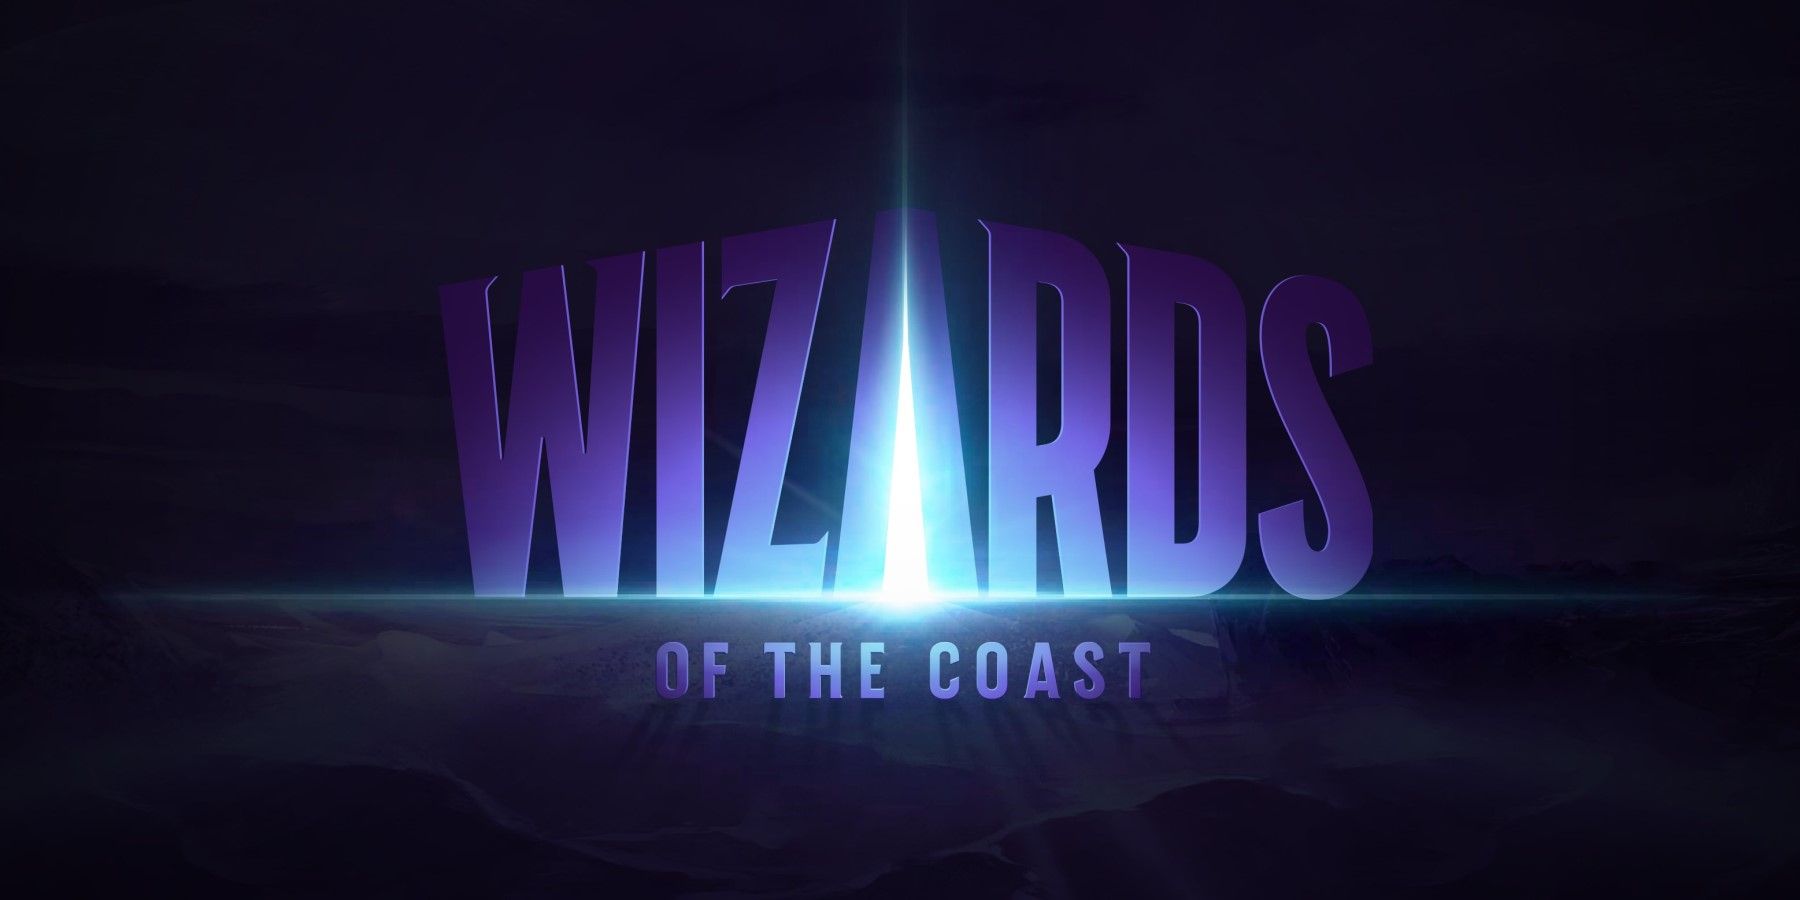 Wizards of the Coast President is Leaving the Company